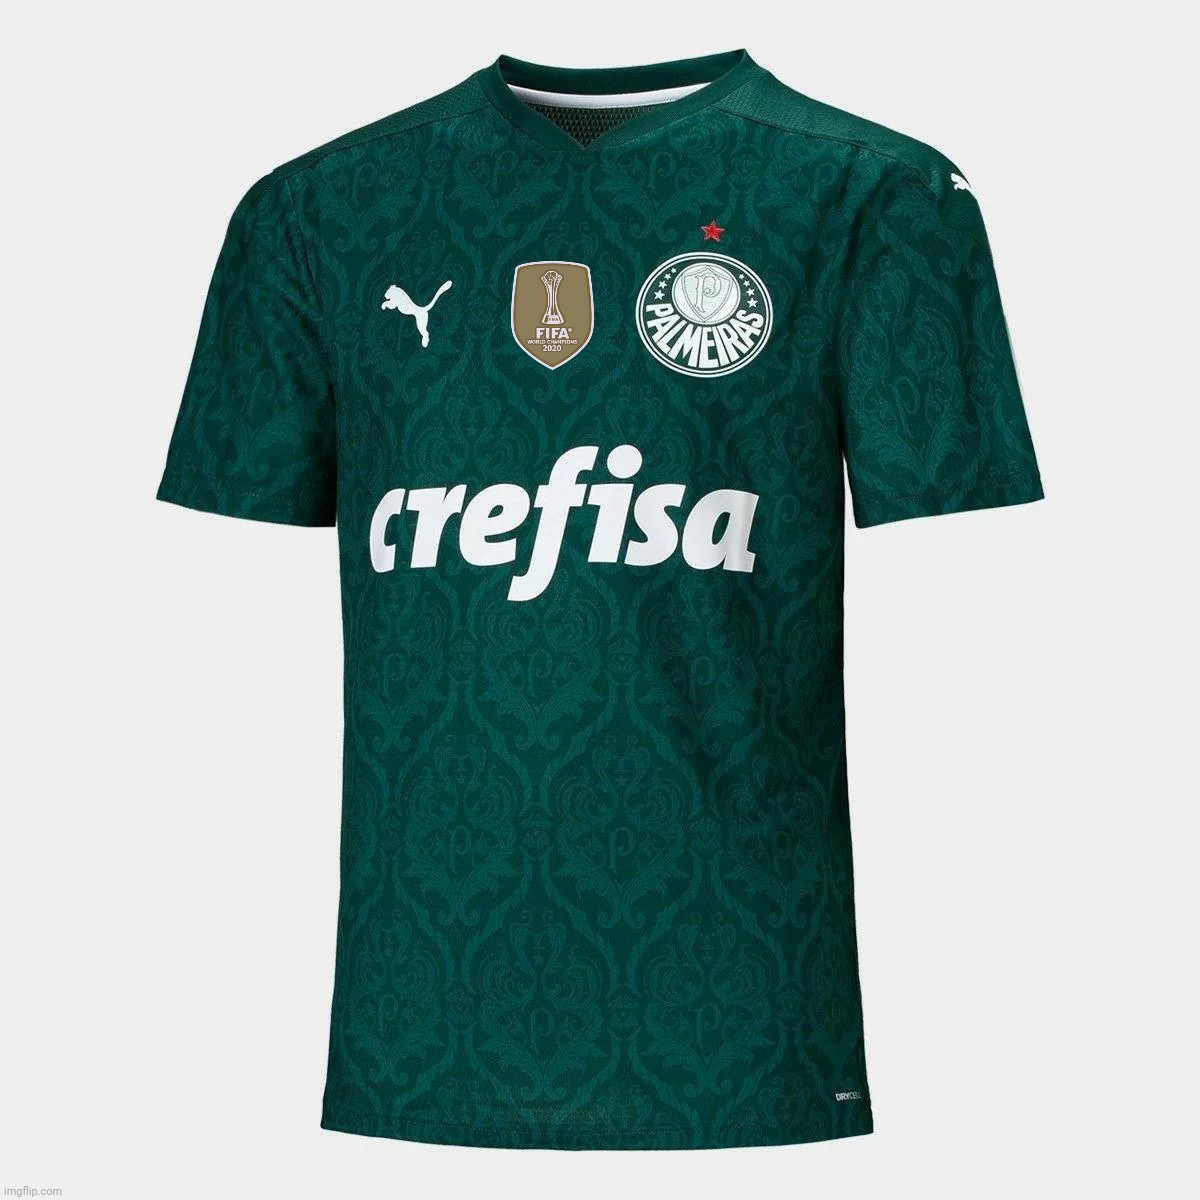 2021 Palmeiras Home Shirt with Club World Cup winners Badge if they win CWC | image tagged in memes,futebol,palmeiras | made w/ Imgflip meme maker